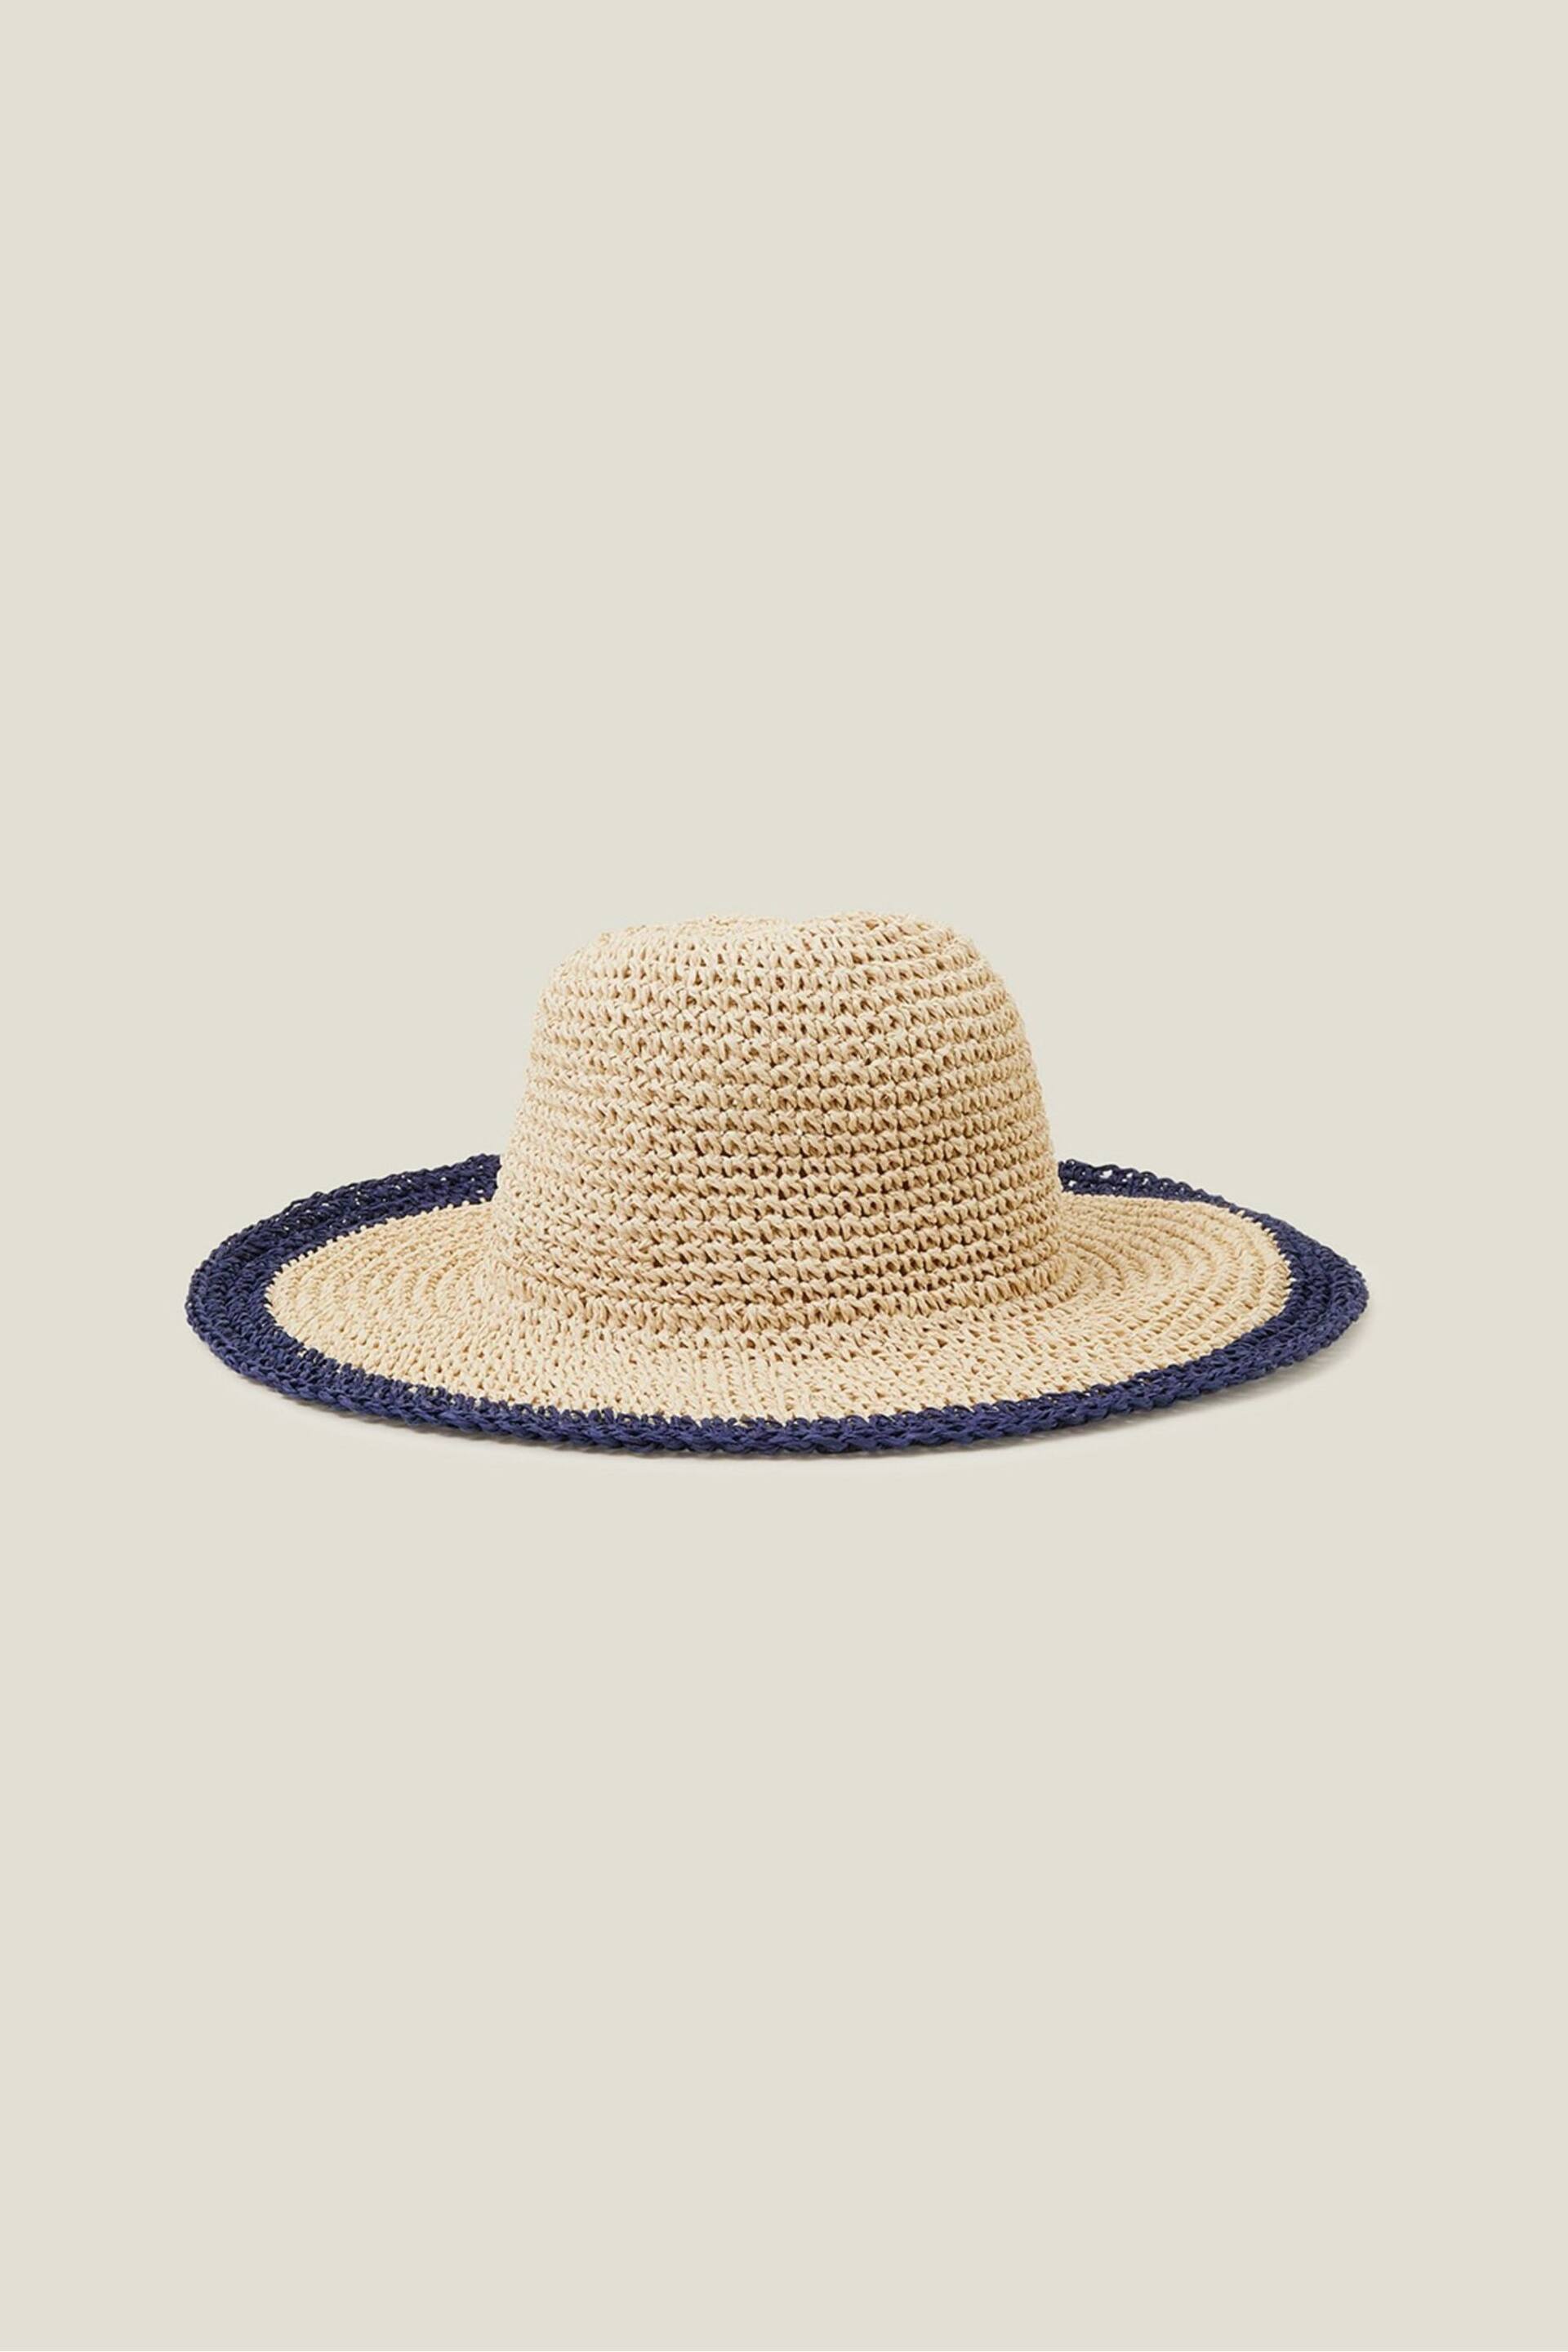 Accessorize Natural Contrast Edge Floppy Hat - Image 1 of 3